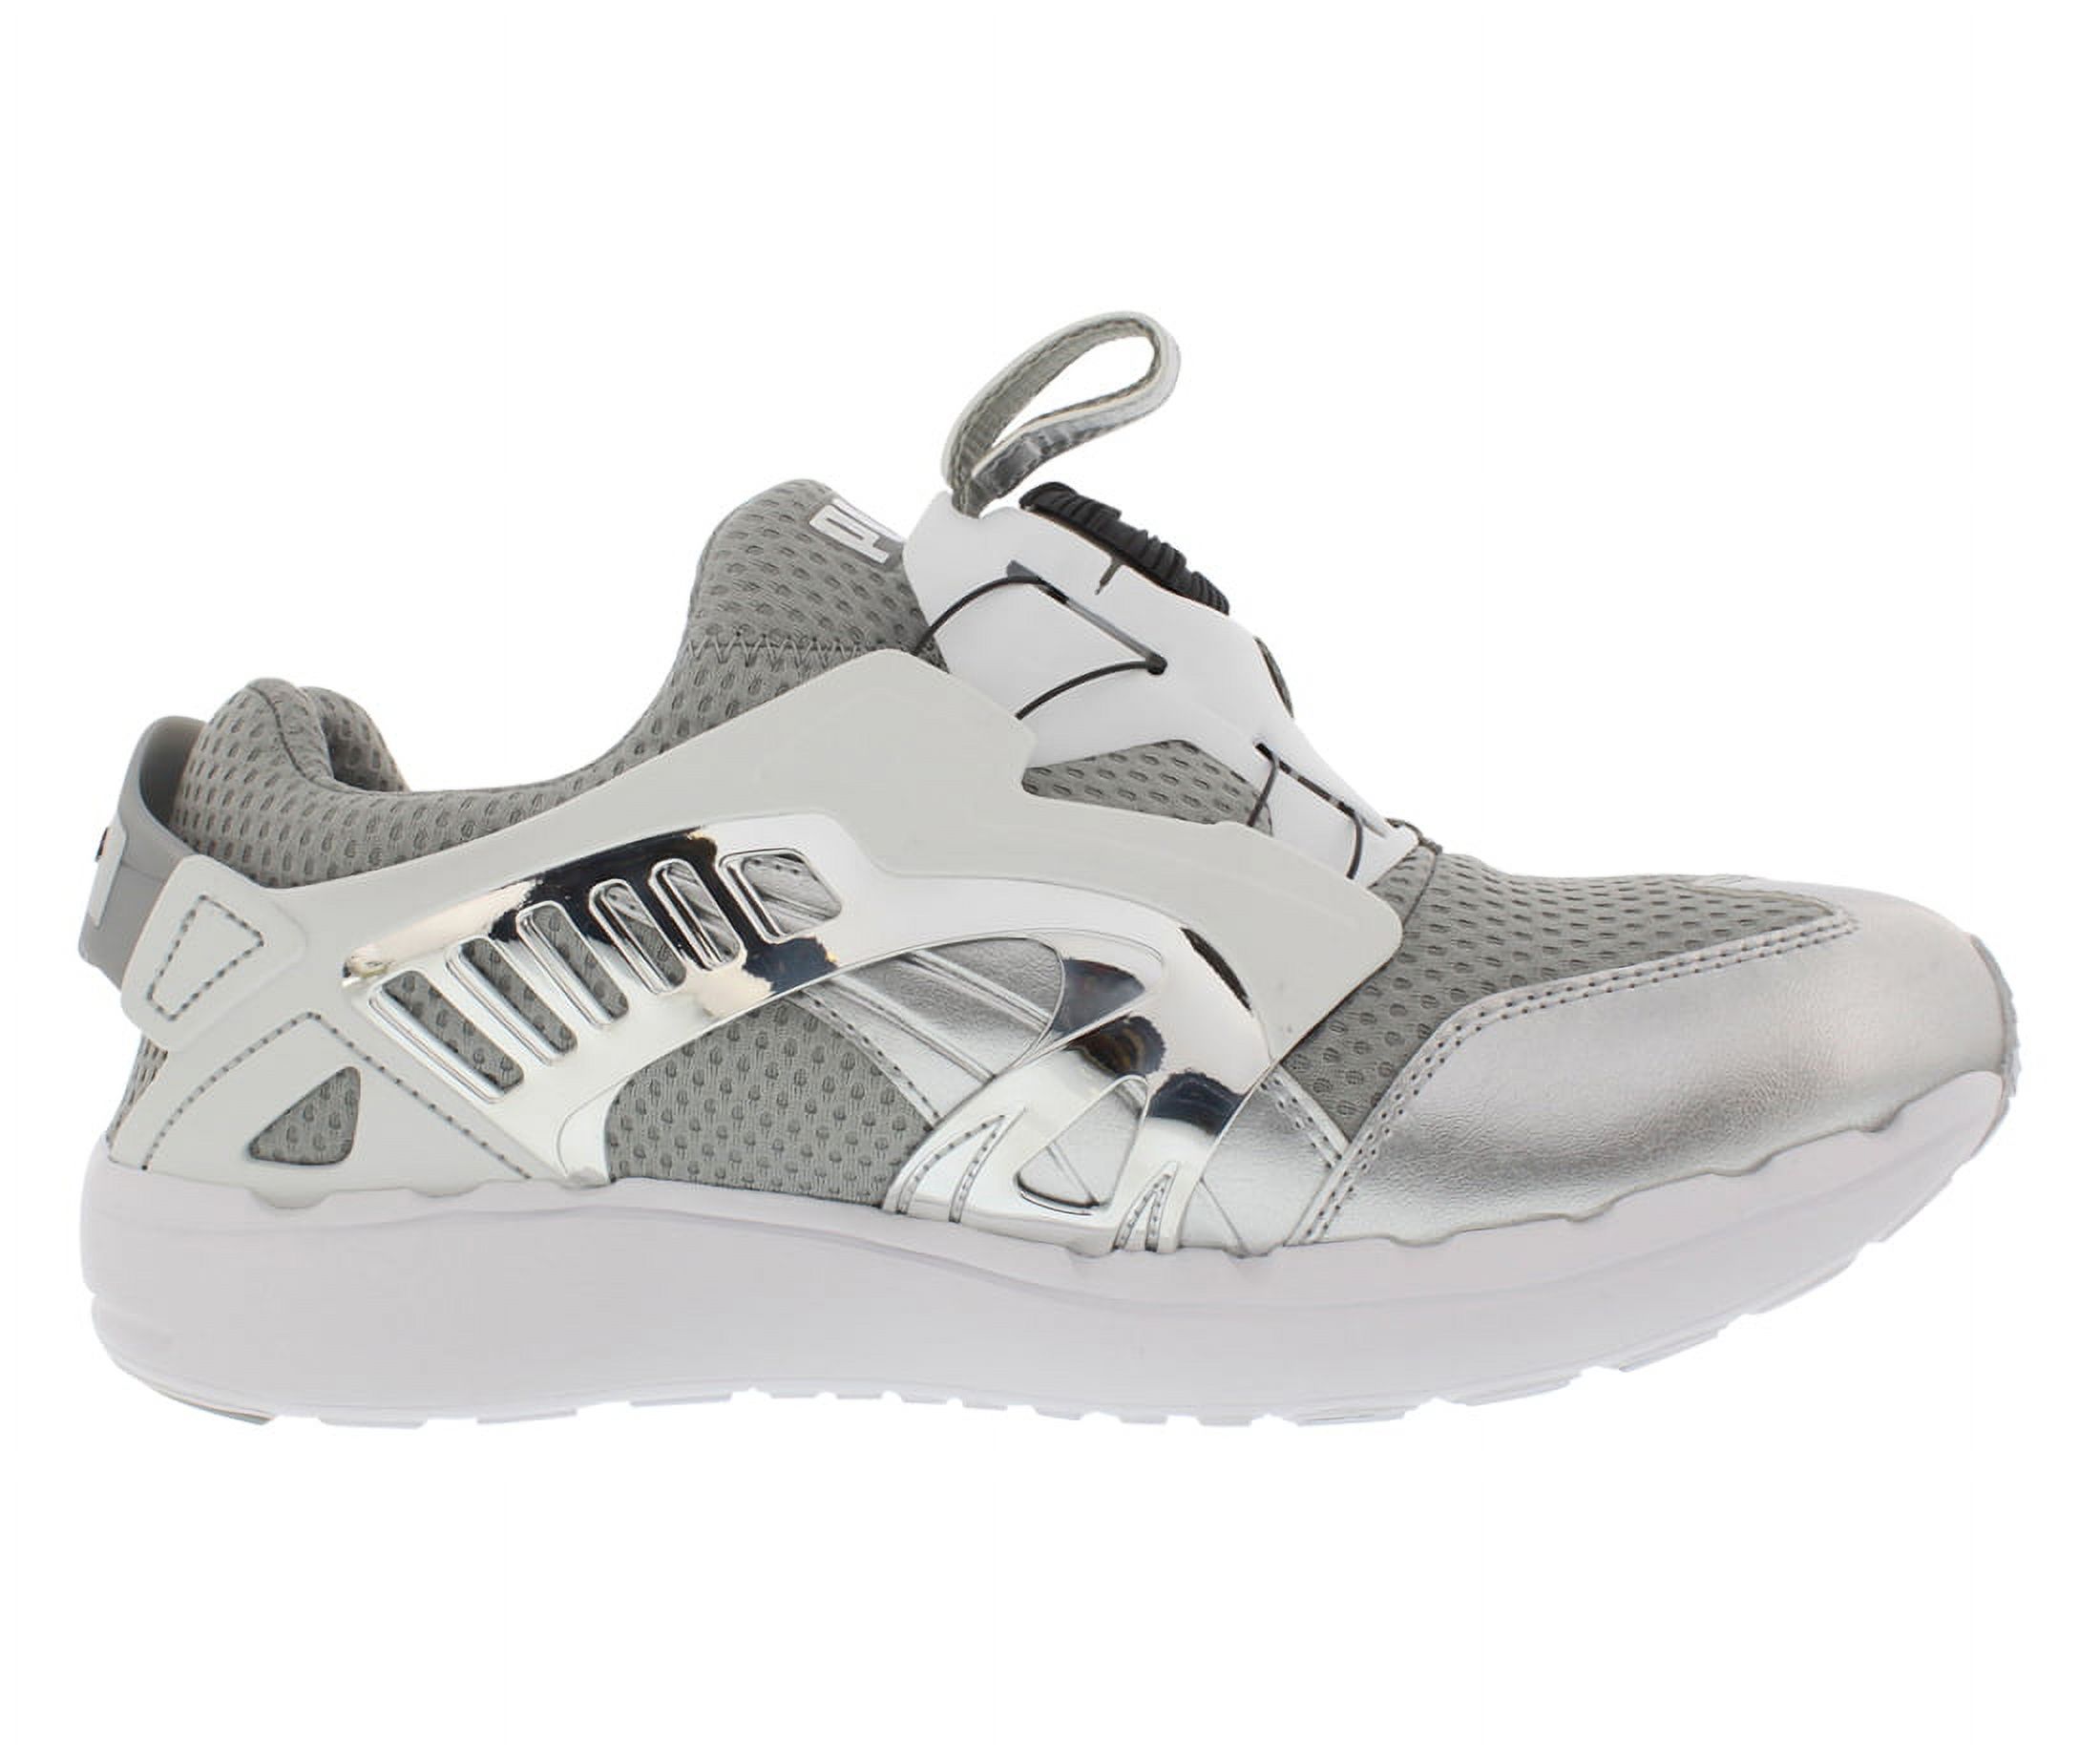 Puma Future Disc Lt Opulence Men's Athletic Slip On Shoes Sneakers, Grey - image 3 of 4